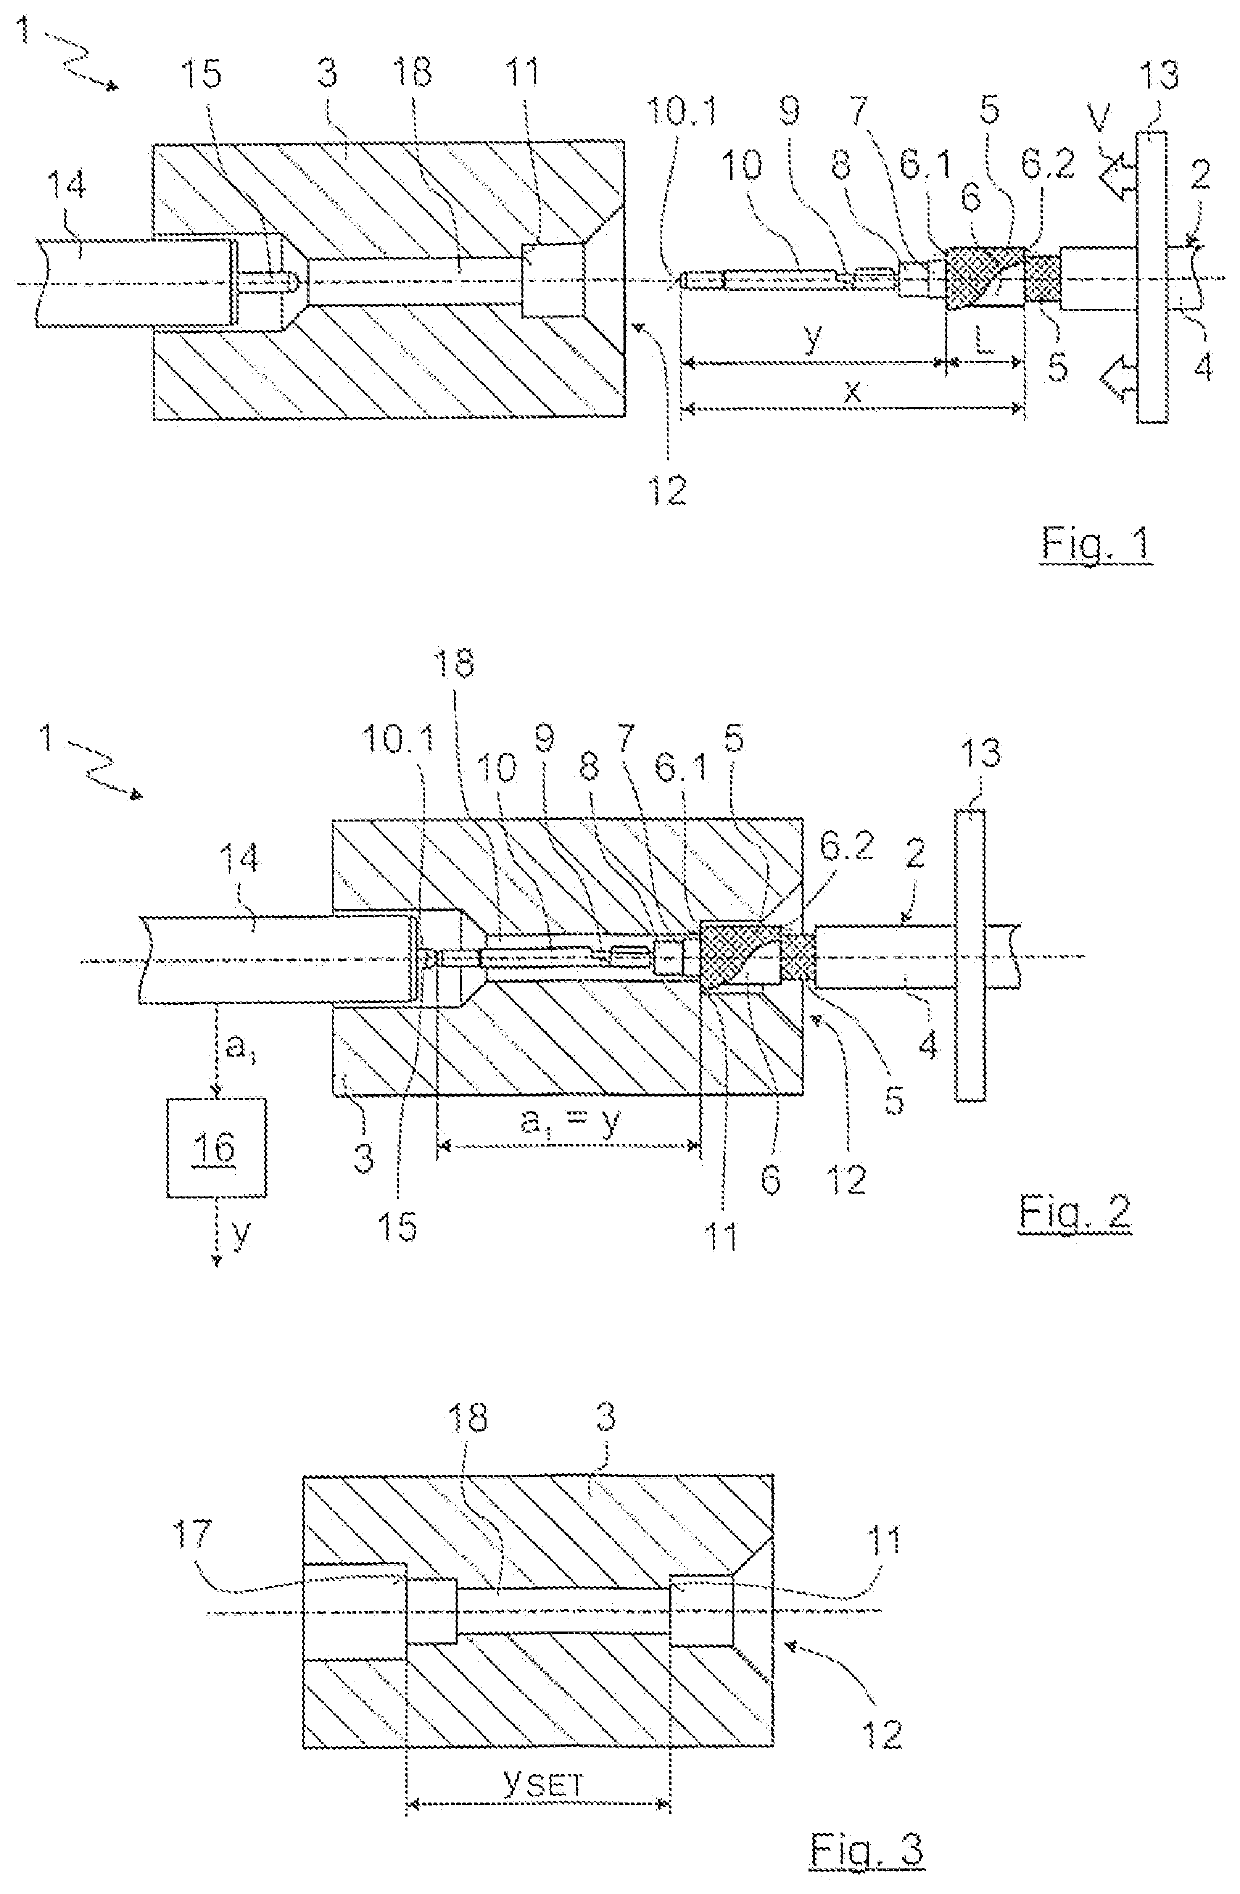 Measurement and positioning methods and arrangements for assembling an electrical cable